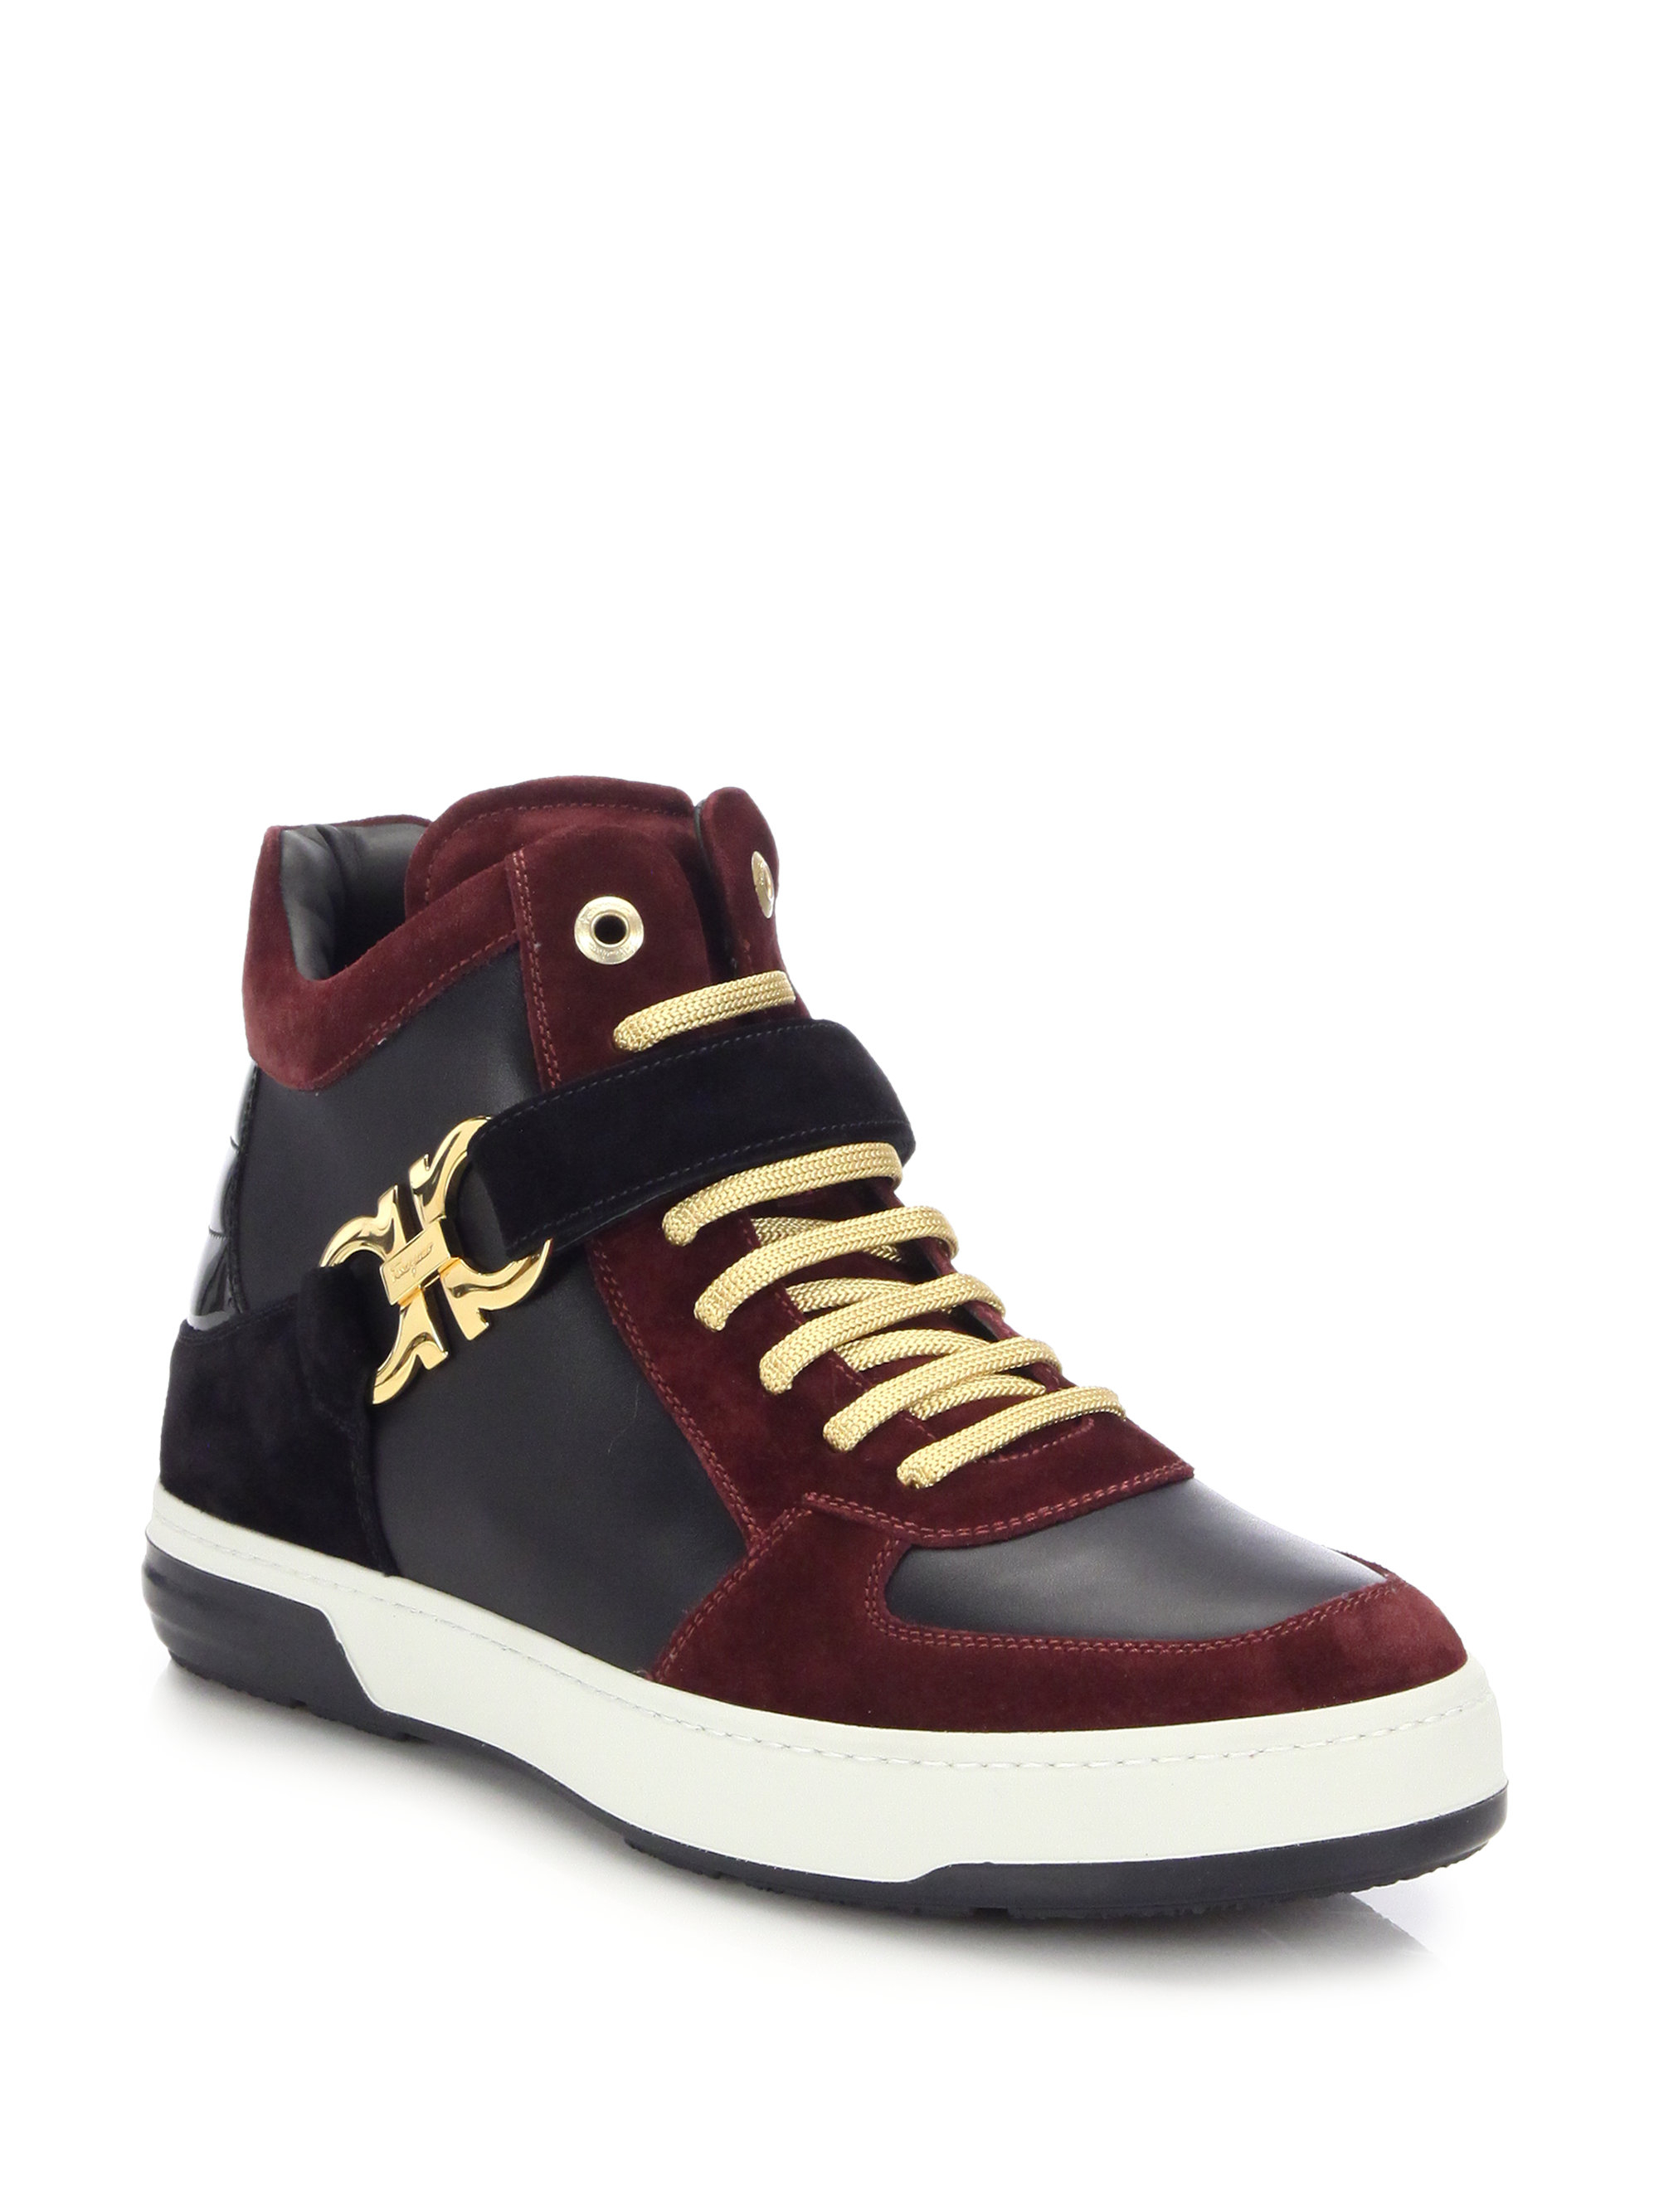 Lyst - Ferragamo Nayon Leather High-top Sneakers for Men